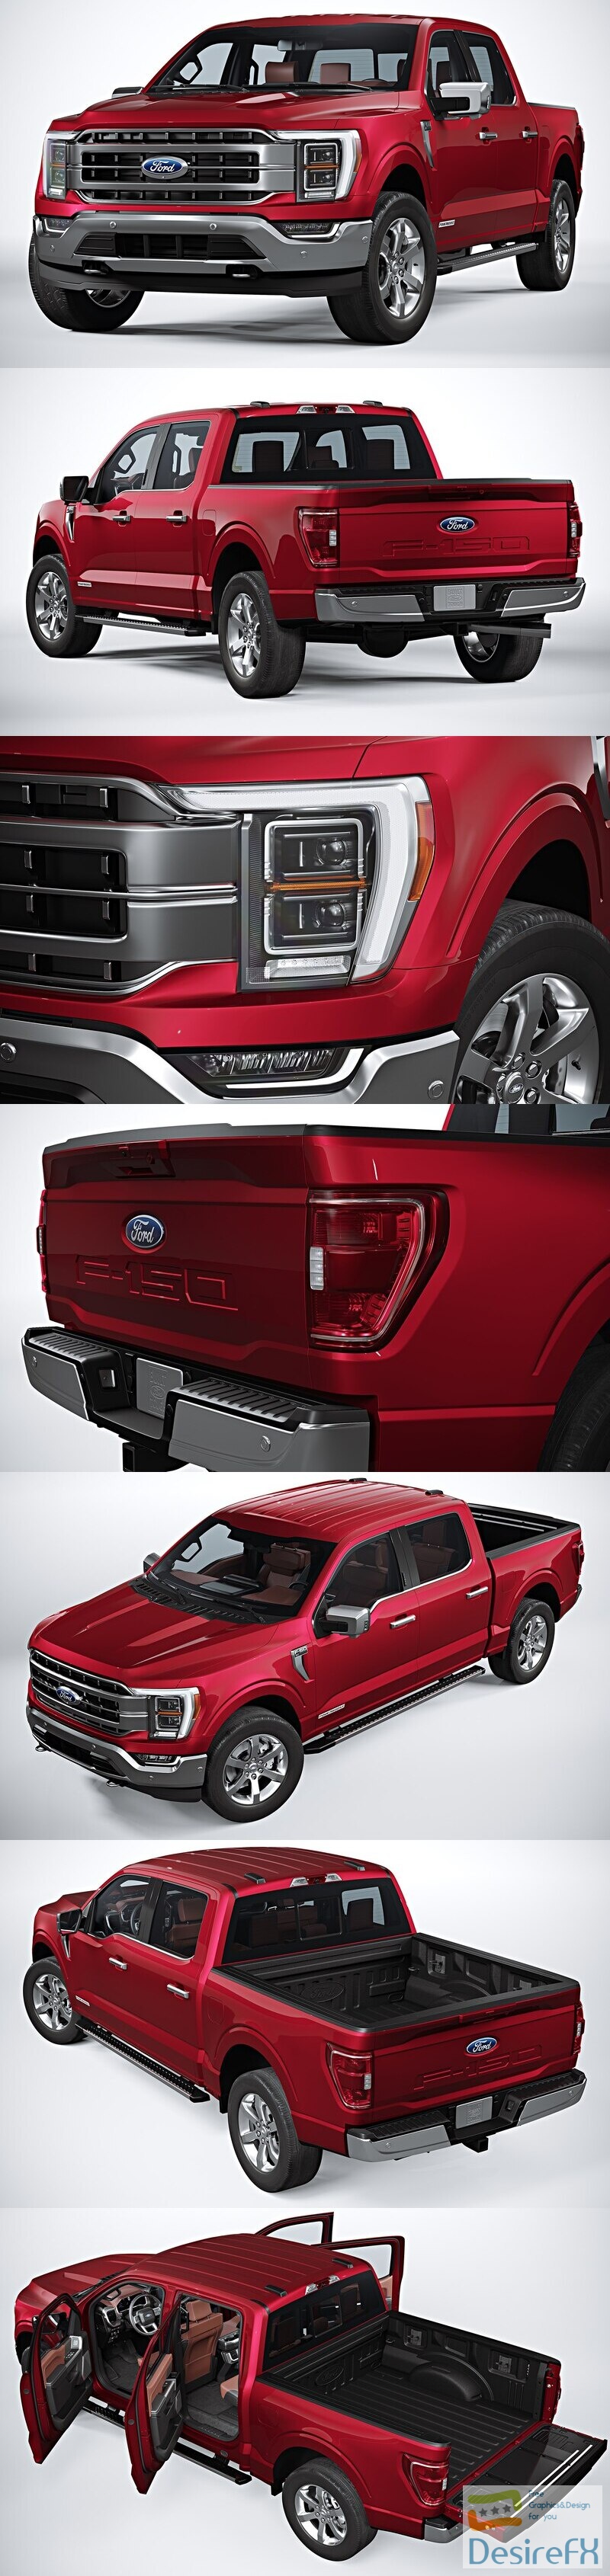 Ford F-150 2021 with HQ interior 3D Model